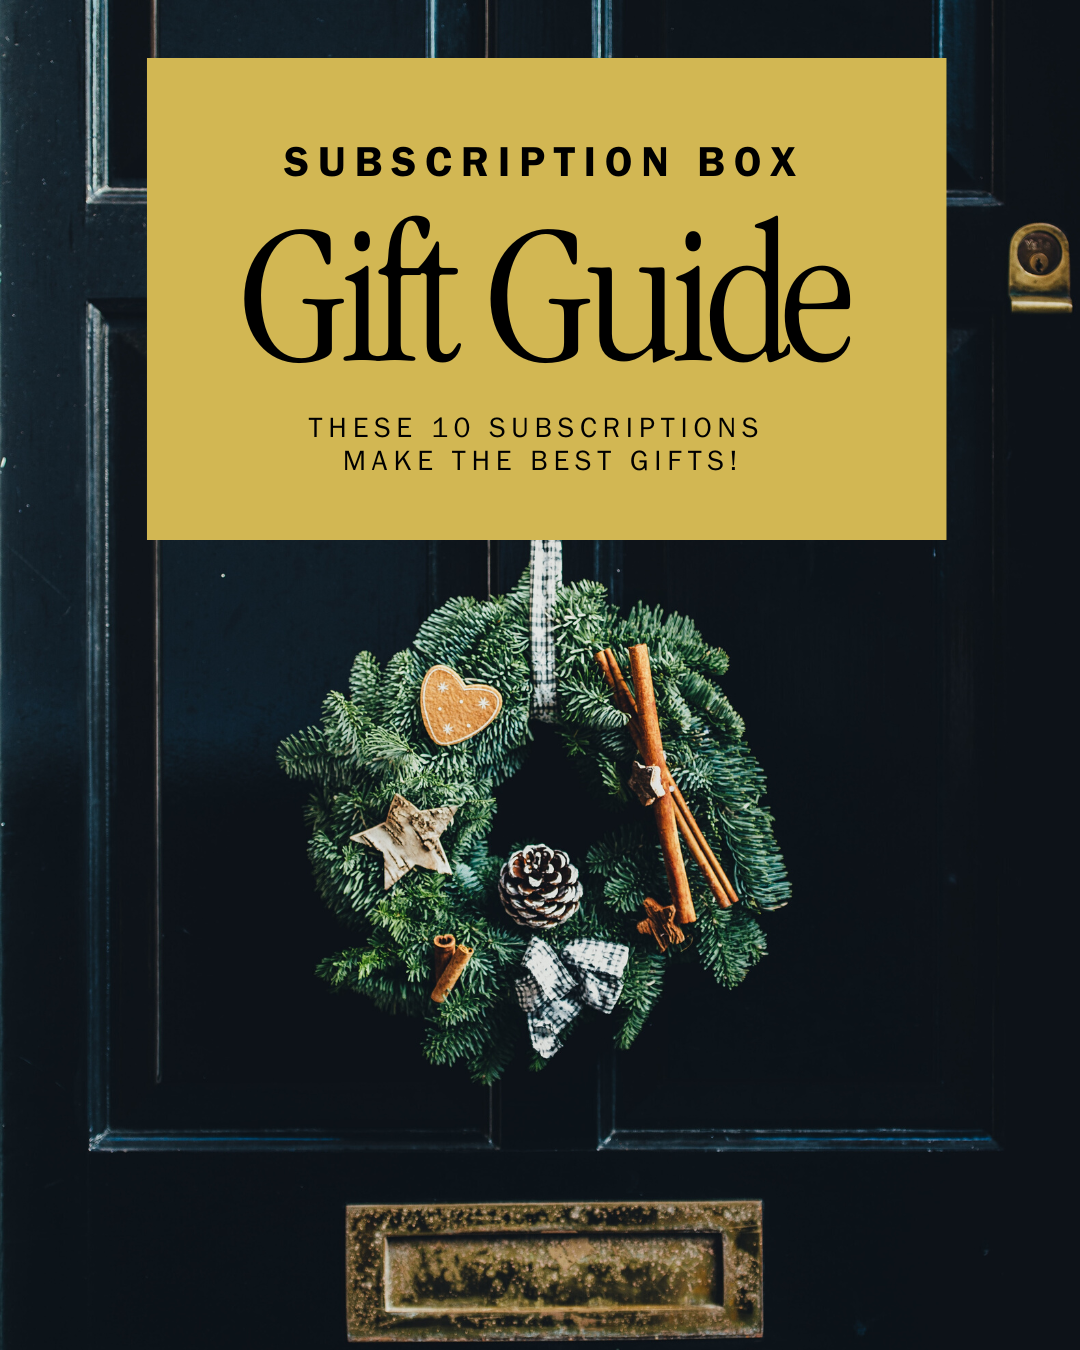 Subscription Box Gift Guide Cover Image